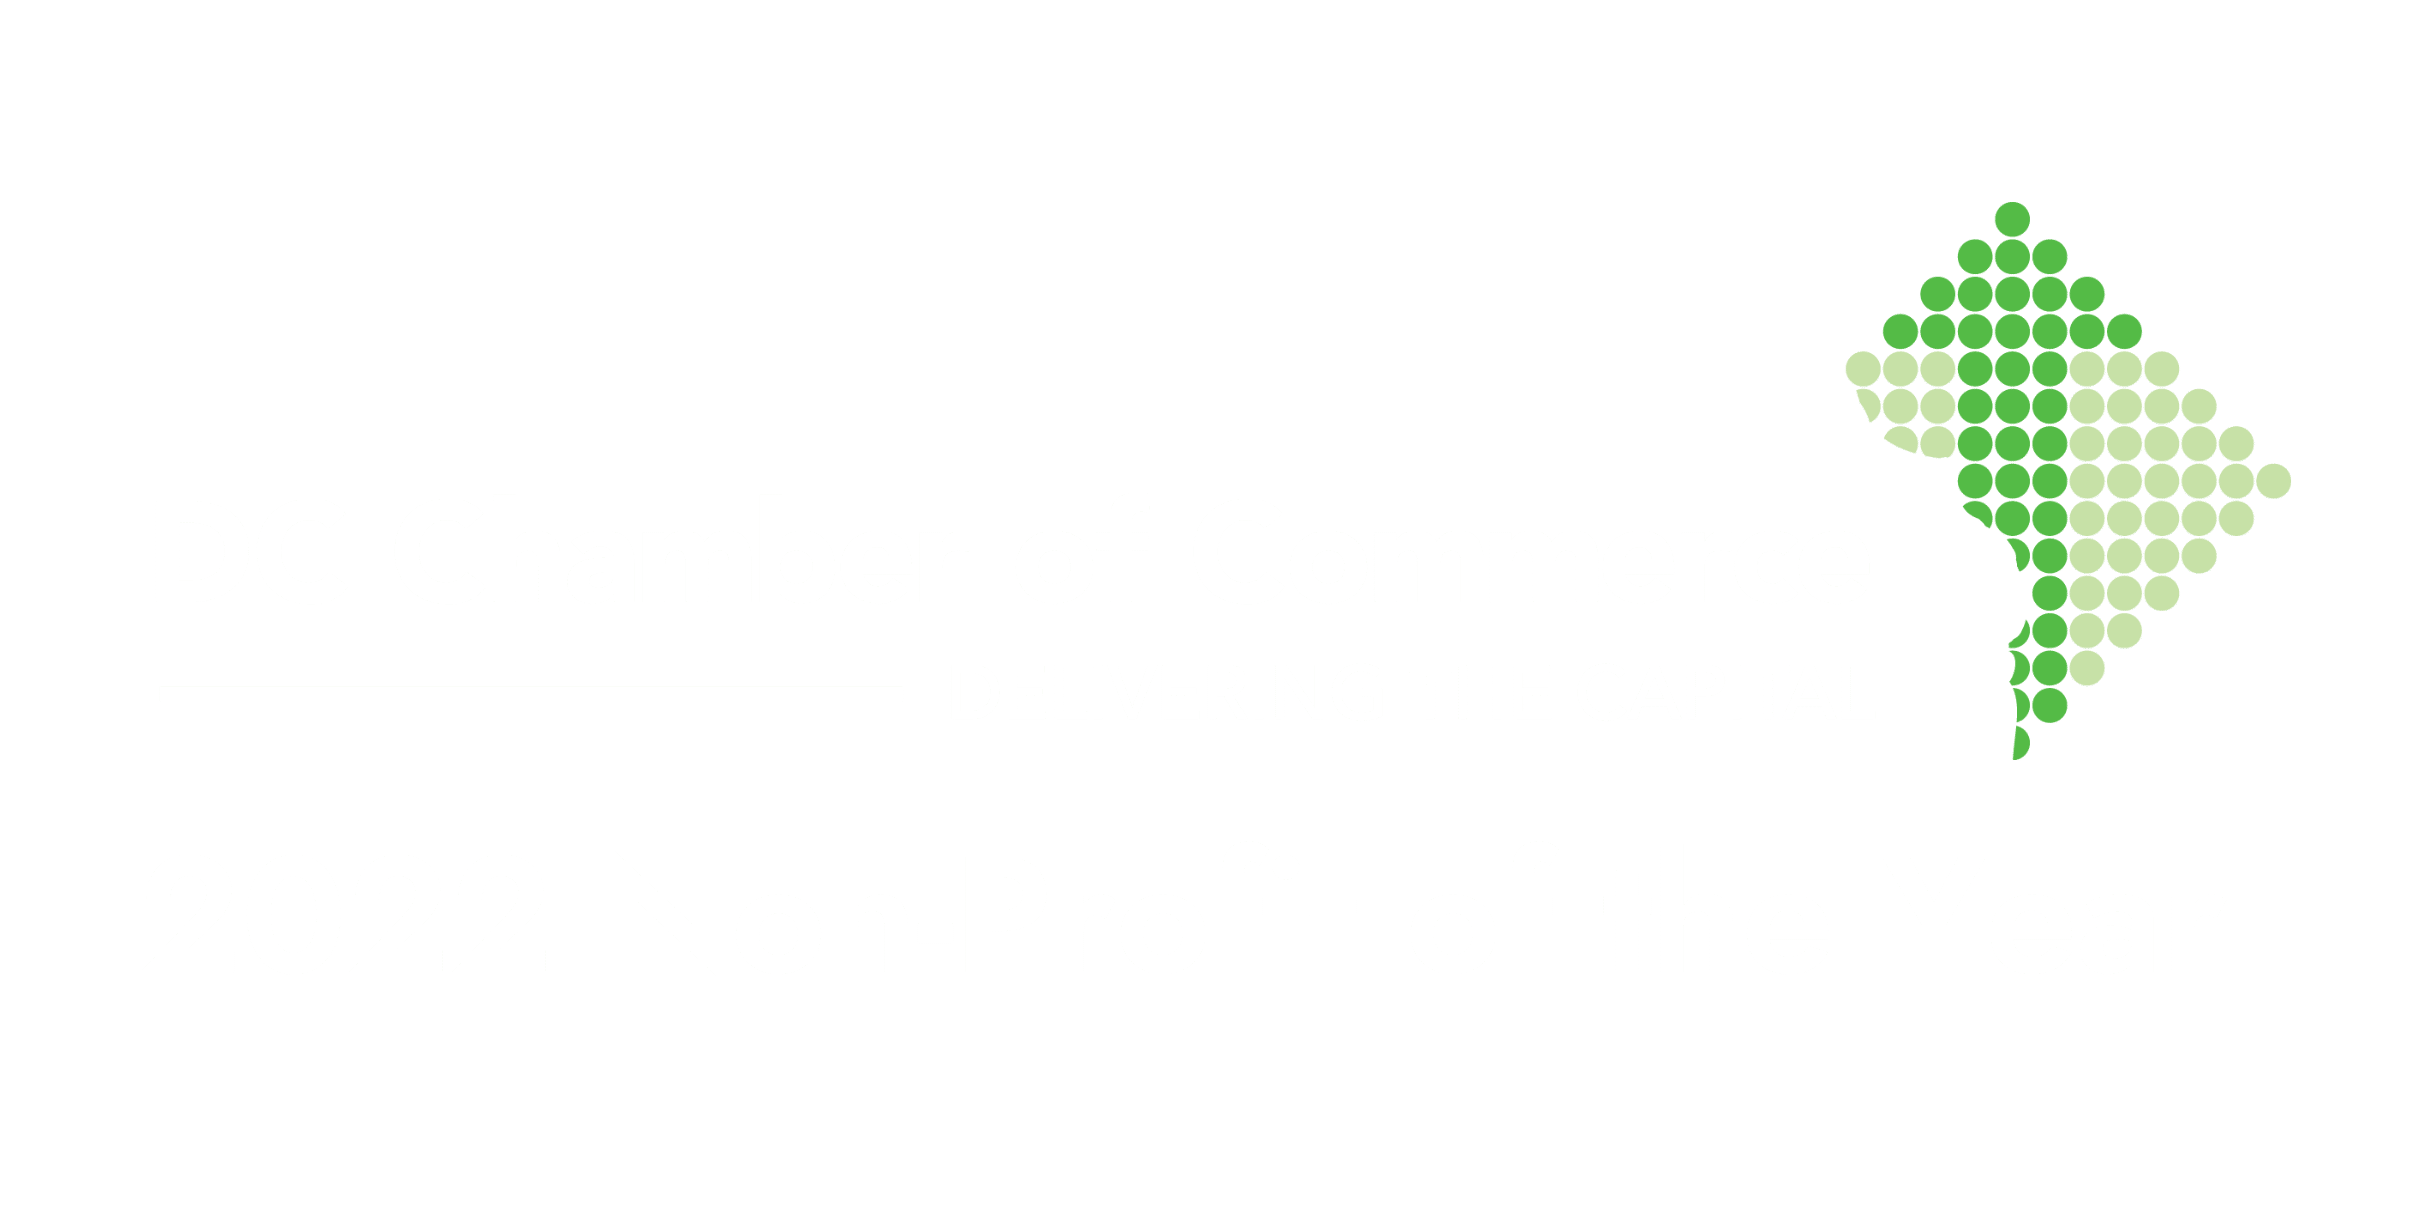 LOGO DC Chamber of Commerce Non Profit of the Year WACIF (2160 × 1080 px) (1)